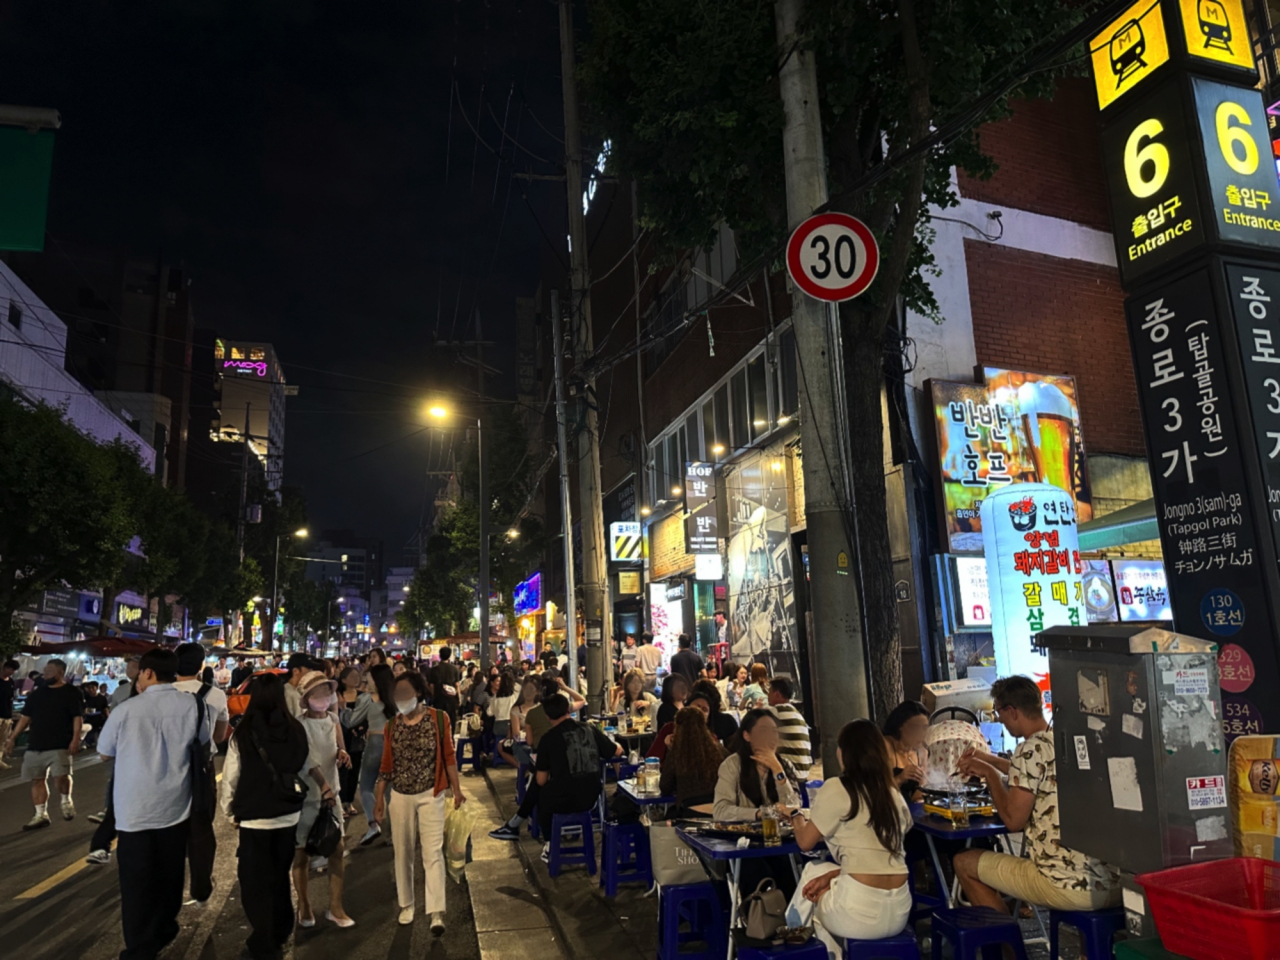 The street in front of Jongno 3-ga Station's Exit 6, central Seoul, bustles with people enjoying the vibrant outdoor ambiance in this photo taken on June 8. (Moon Joon-hyun/The Korea Herald)